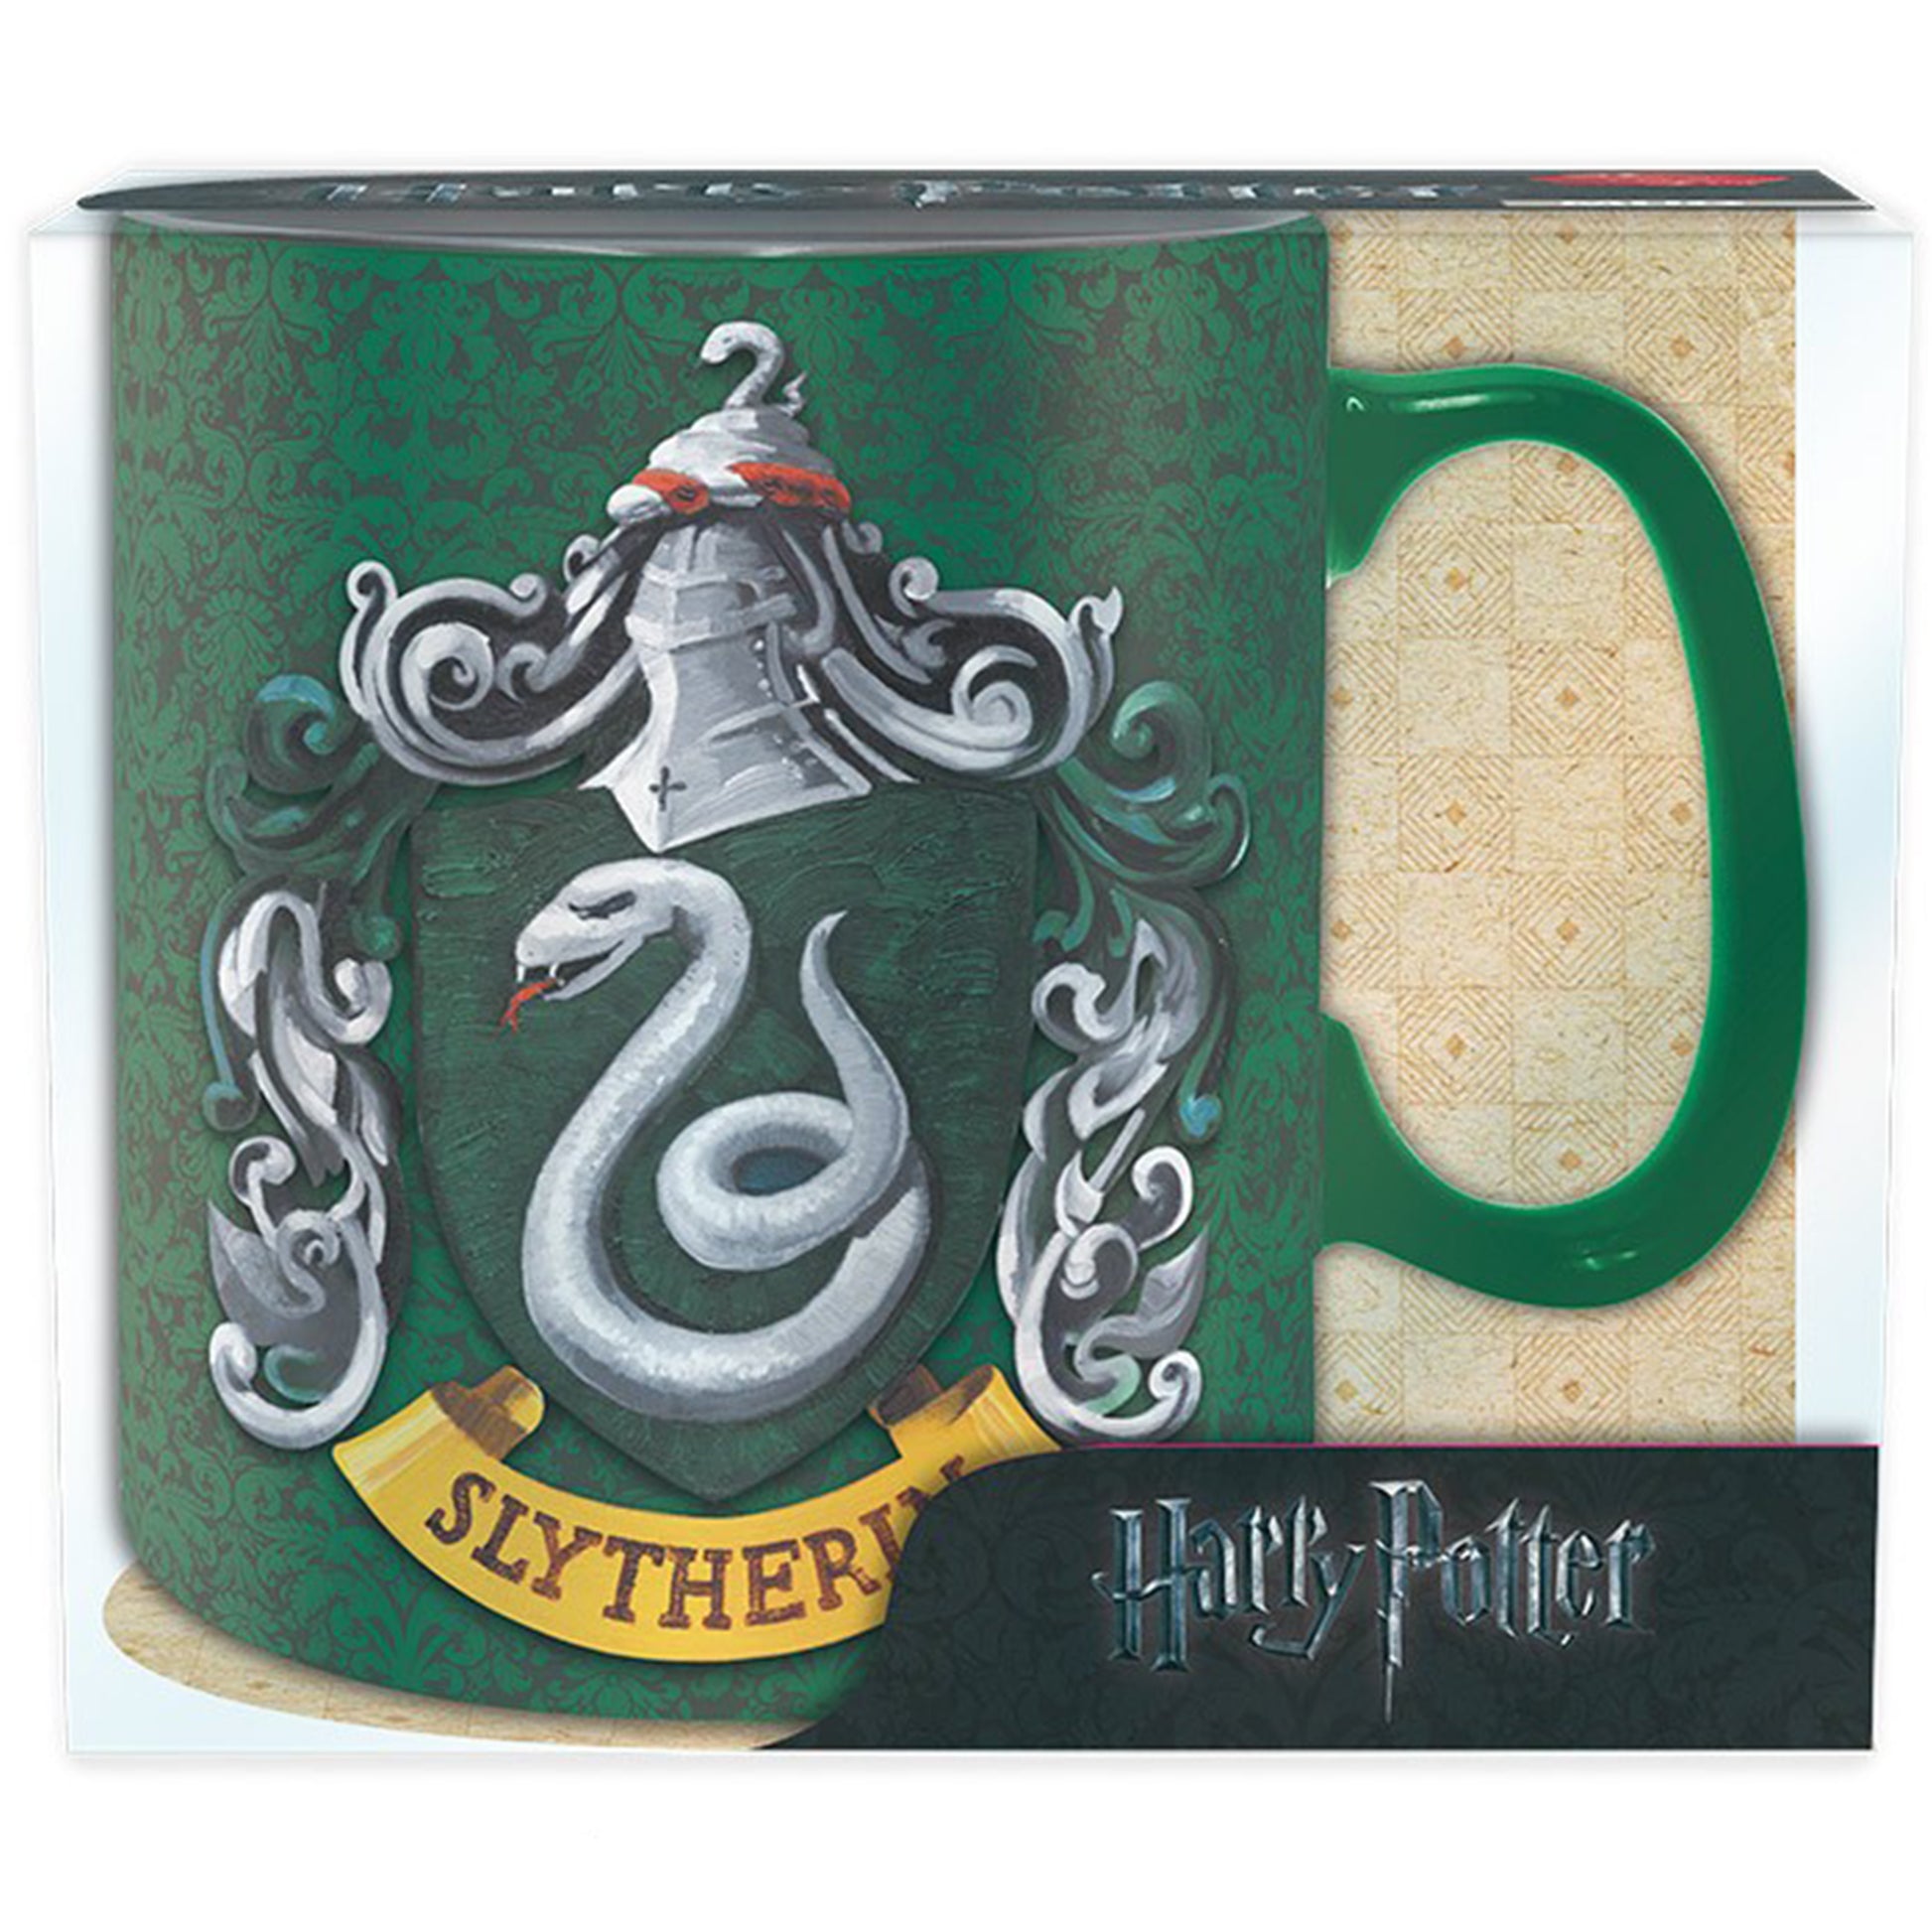 Slytherin King Size Harry Potter Mug in Packaging | Happy Piranha